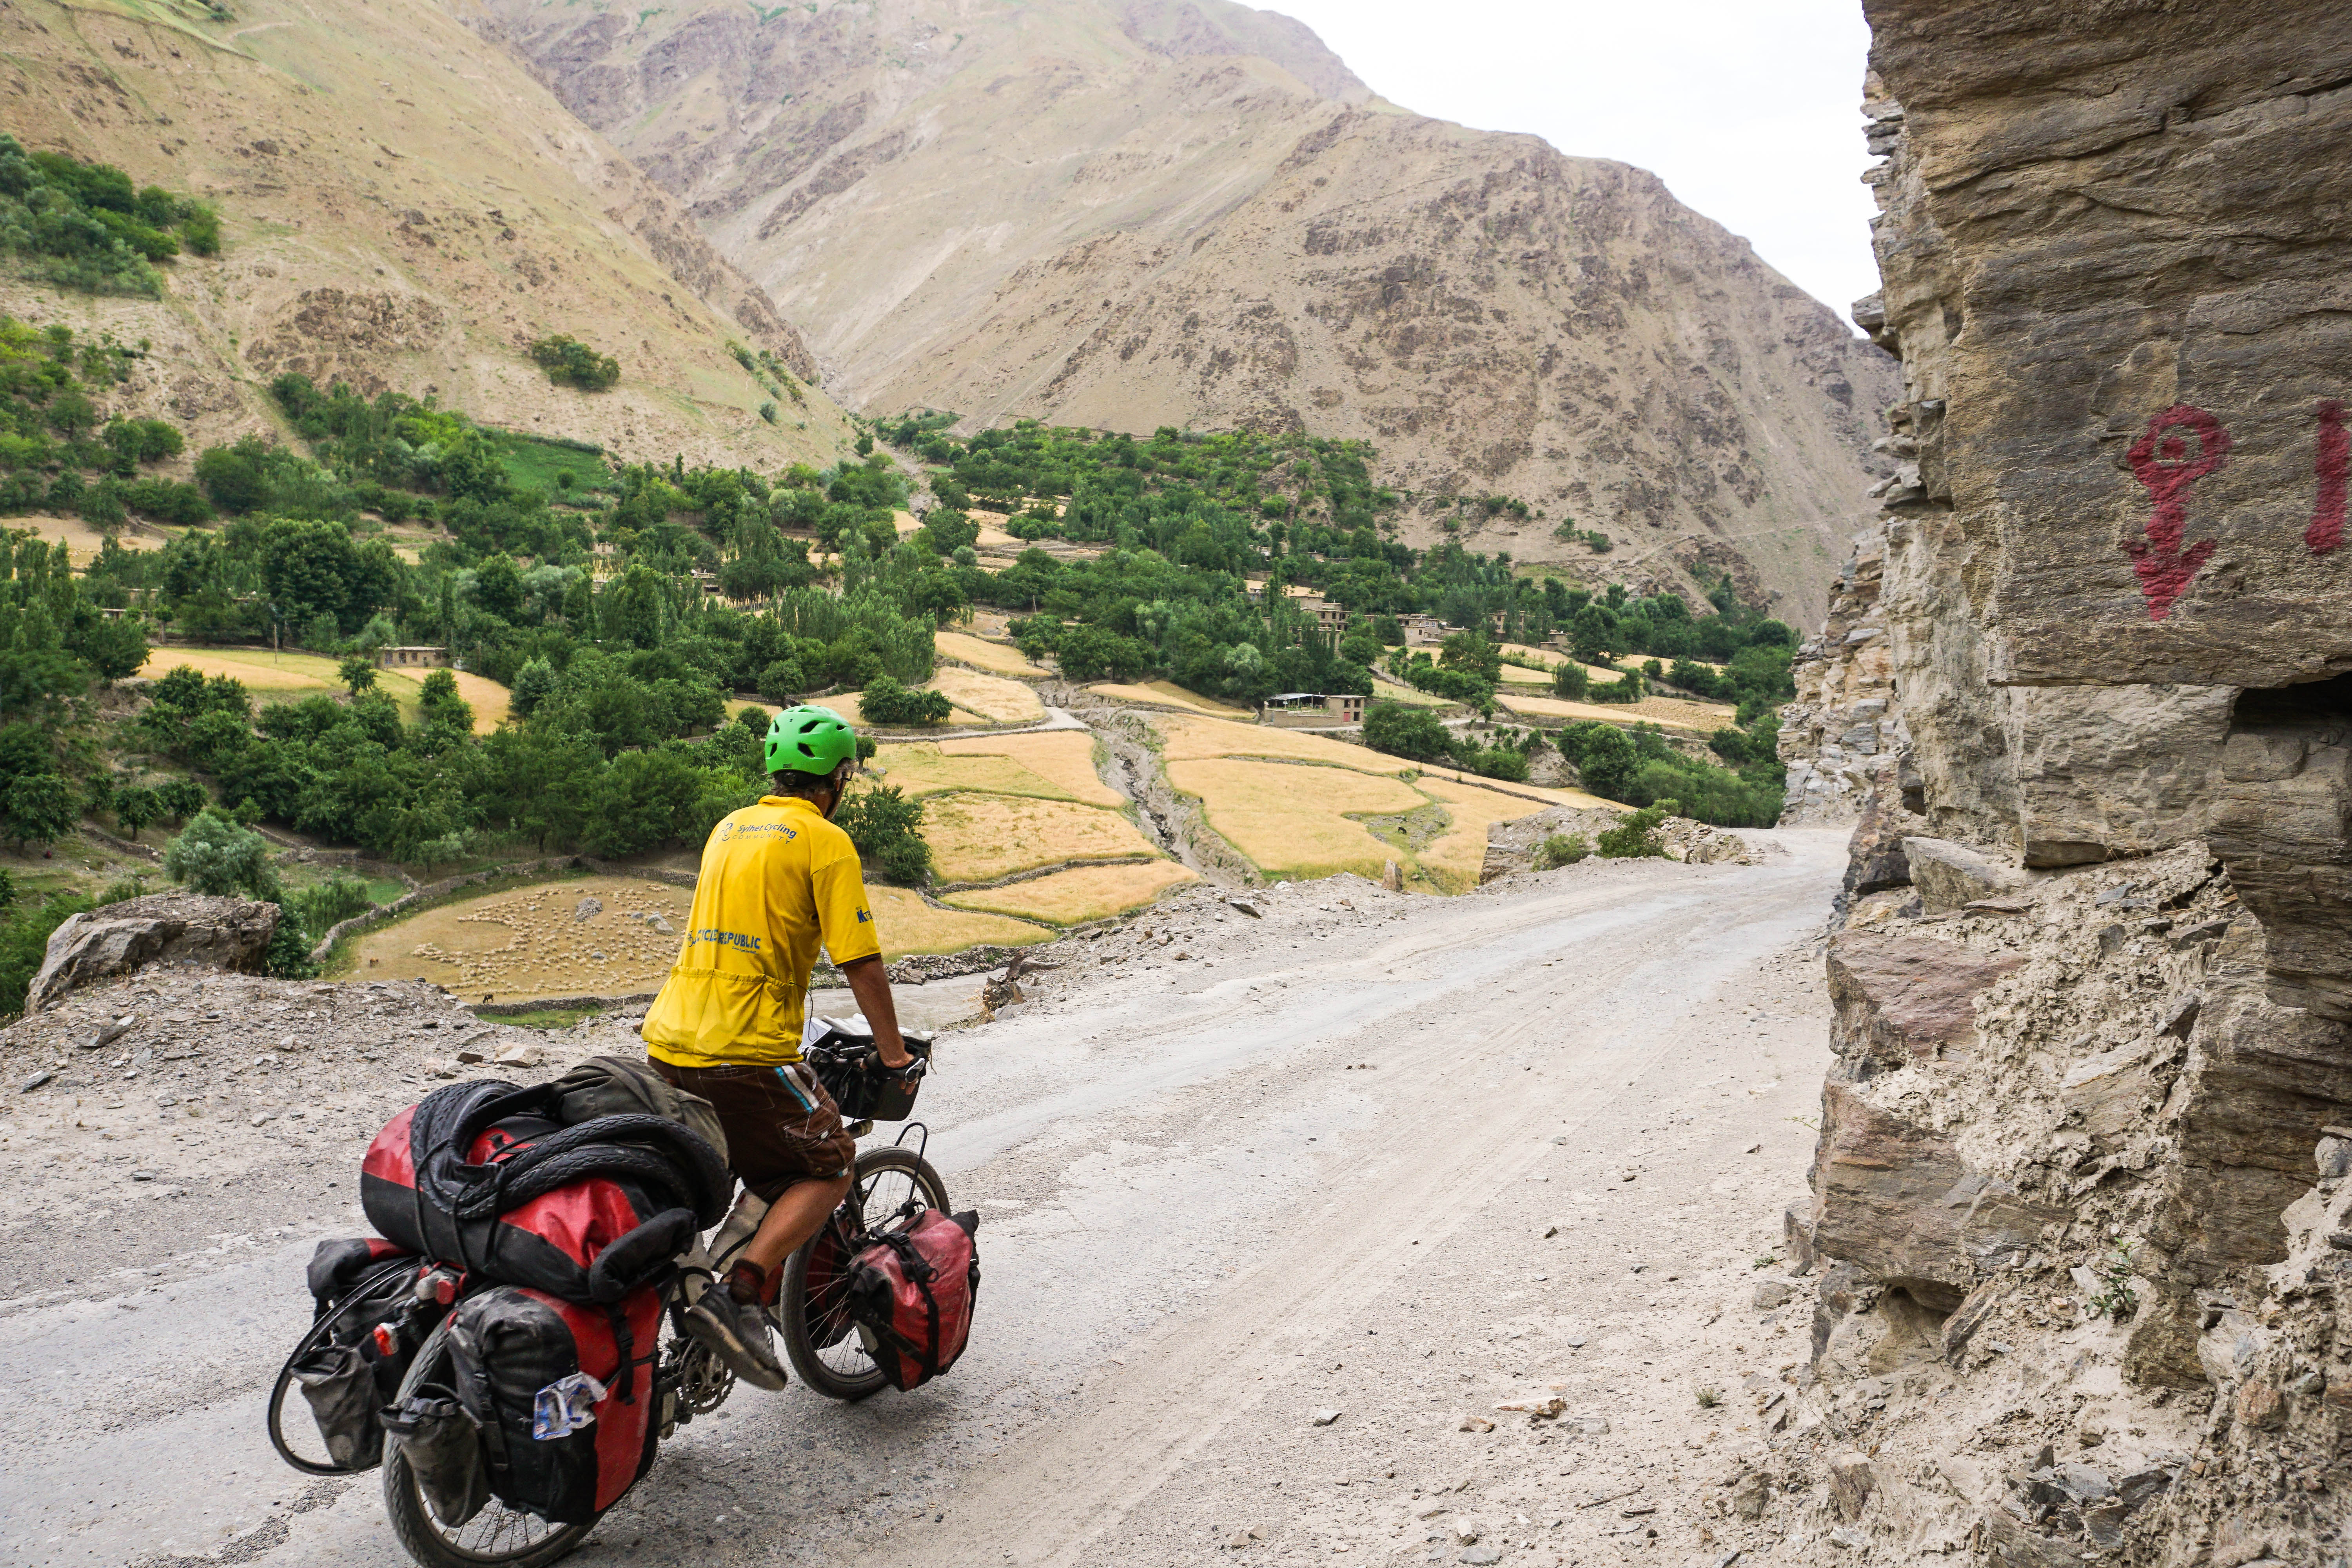 A narrow section of the Pamir Highway with stunning views of Afghanistan just a stone's throw away.